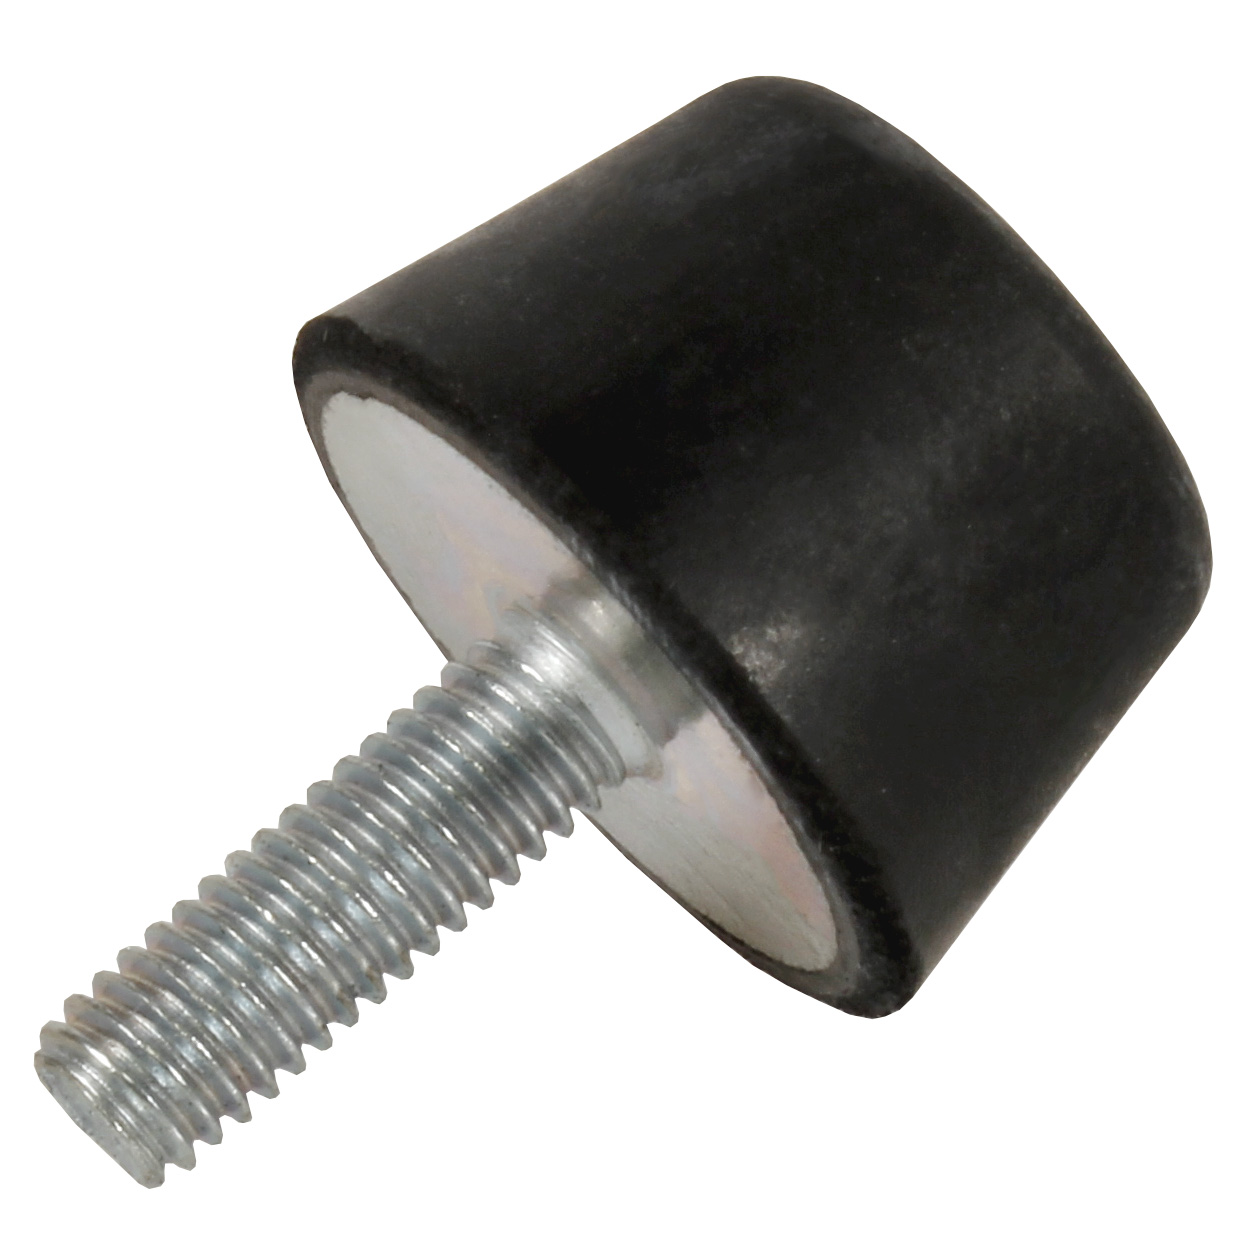 Progressive stop - stainless steel - Conical - 1 side Male